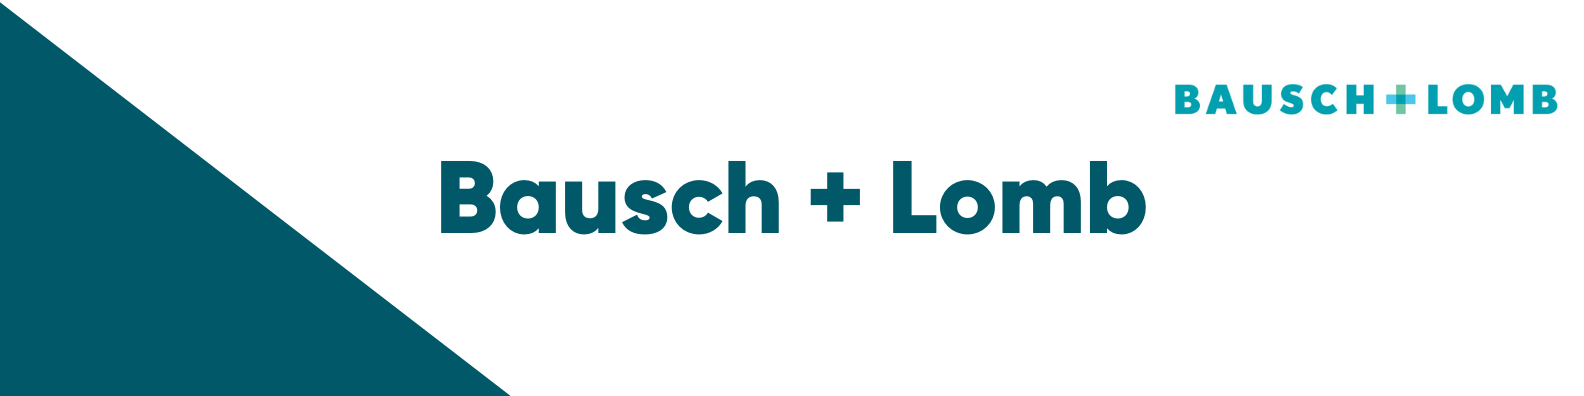 Bausch Health's Bausch + Lomb Announces Completion of the Acquisition of  XIIDRA(R)